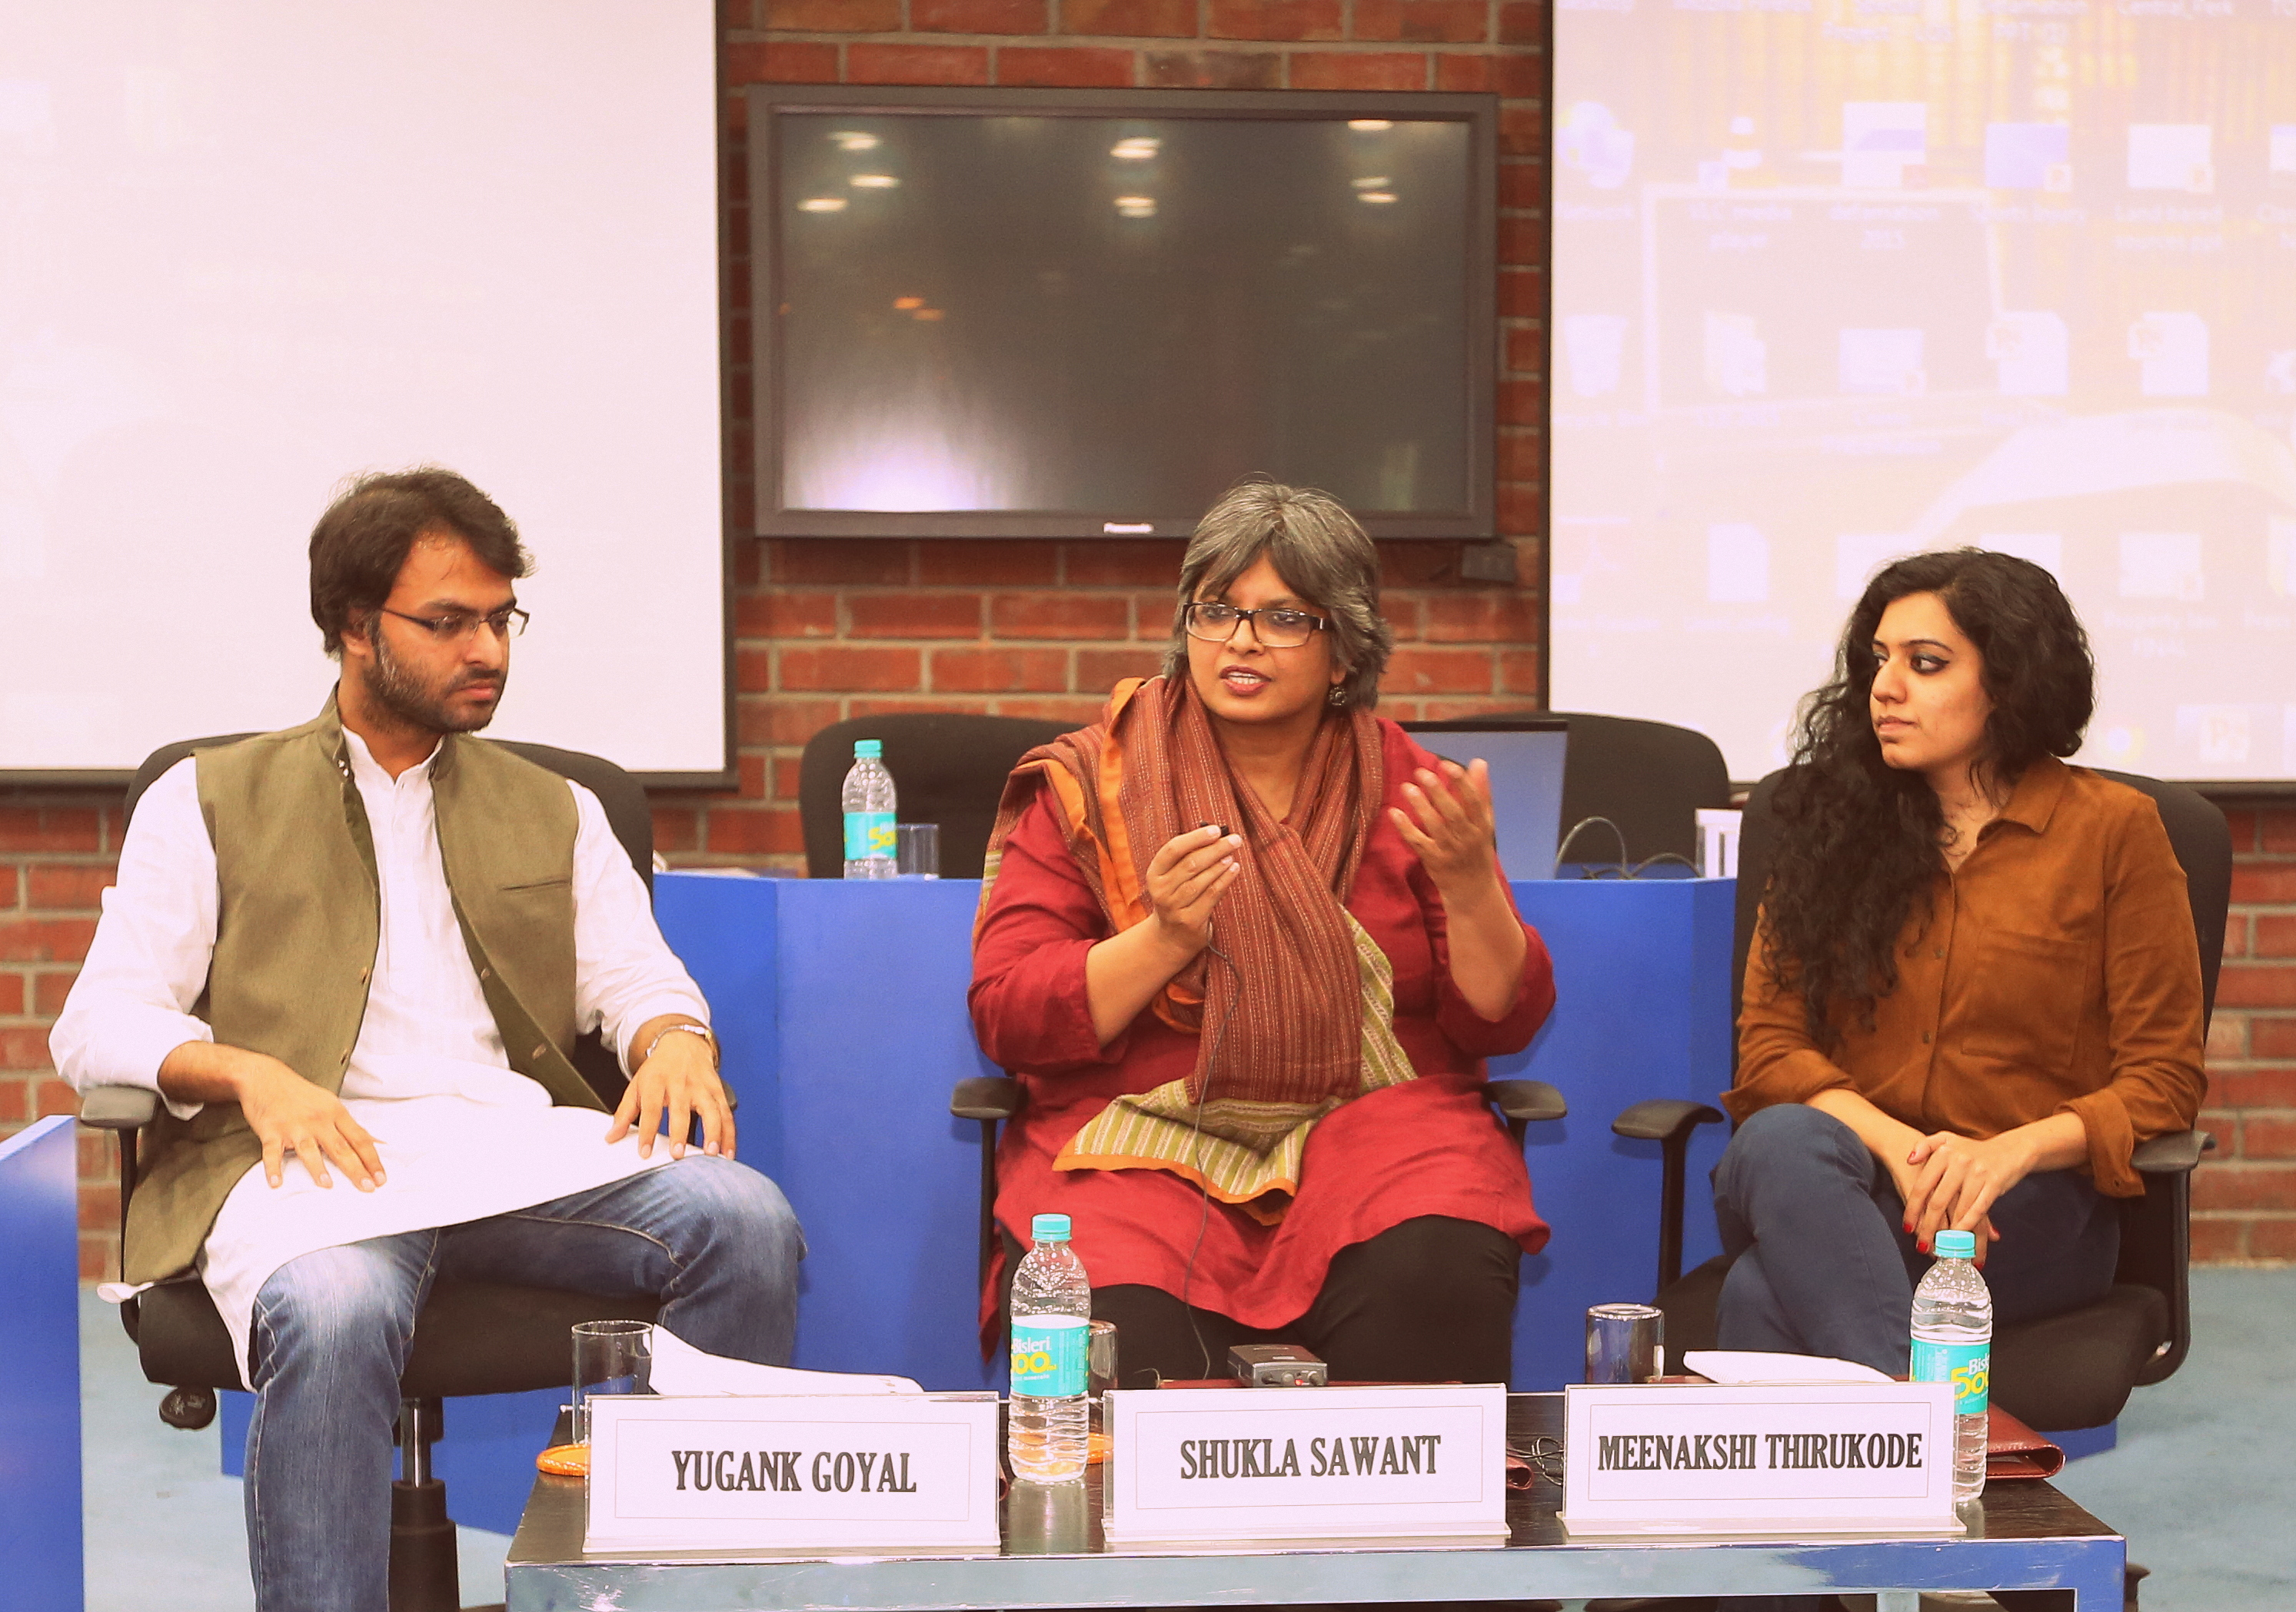 Artists, Curators and Scholars Debate the “The Value of Art”, at a Seminar Hosted by Jindal Global University